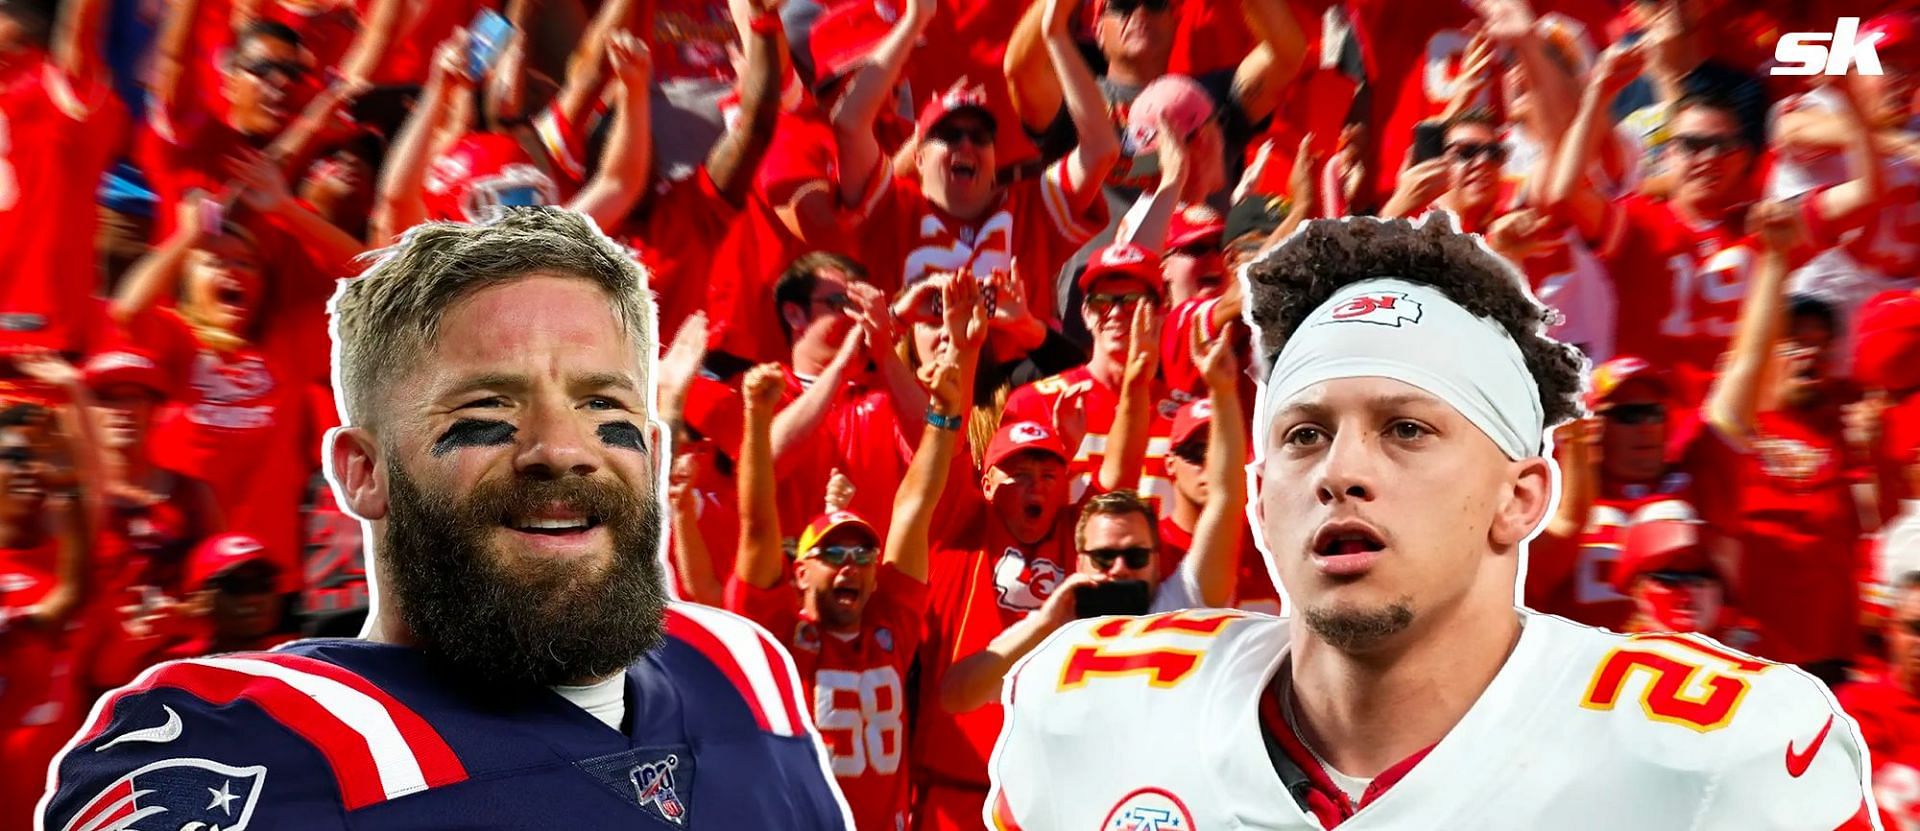 Julian Edelman on Patrick Mahomes and the Chiefs not being a dynasty